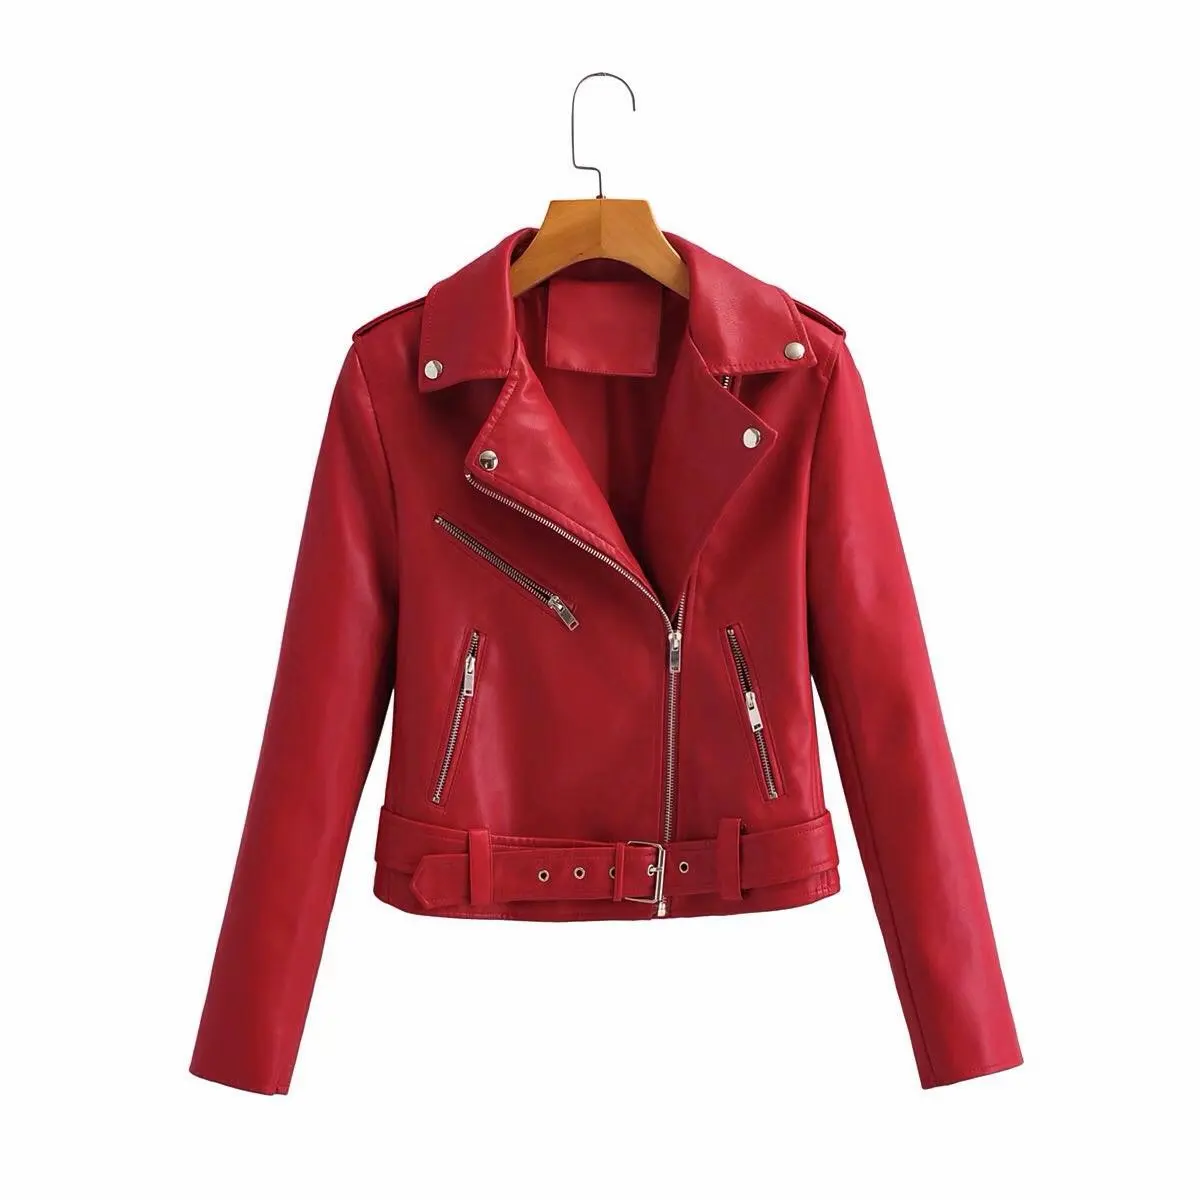 New Arrival brand Winter Autumn Red Motorcycle leather jackets Black leather jacket women leather coat slim PU jacket Leather